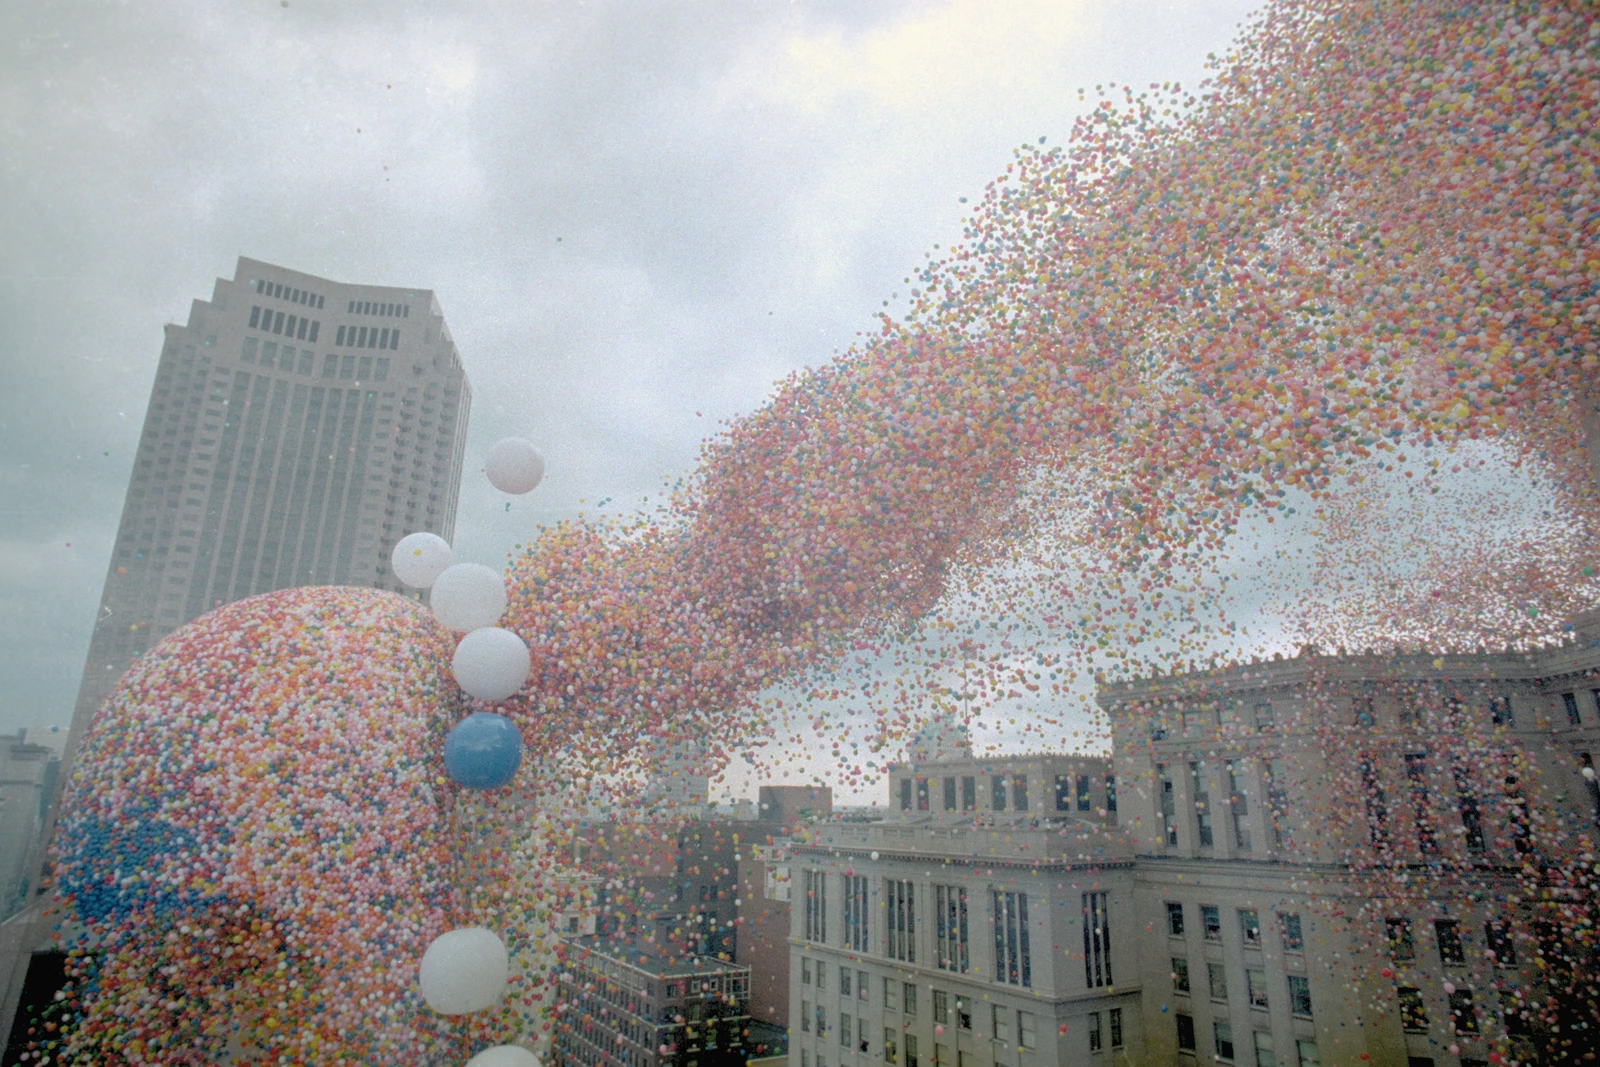 How Clevelands Balloonfest 86 Became a Public Disaster